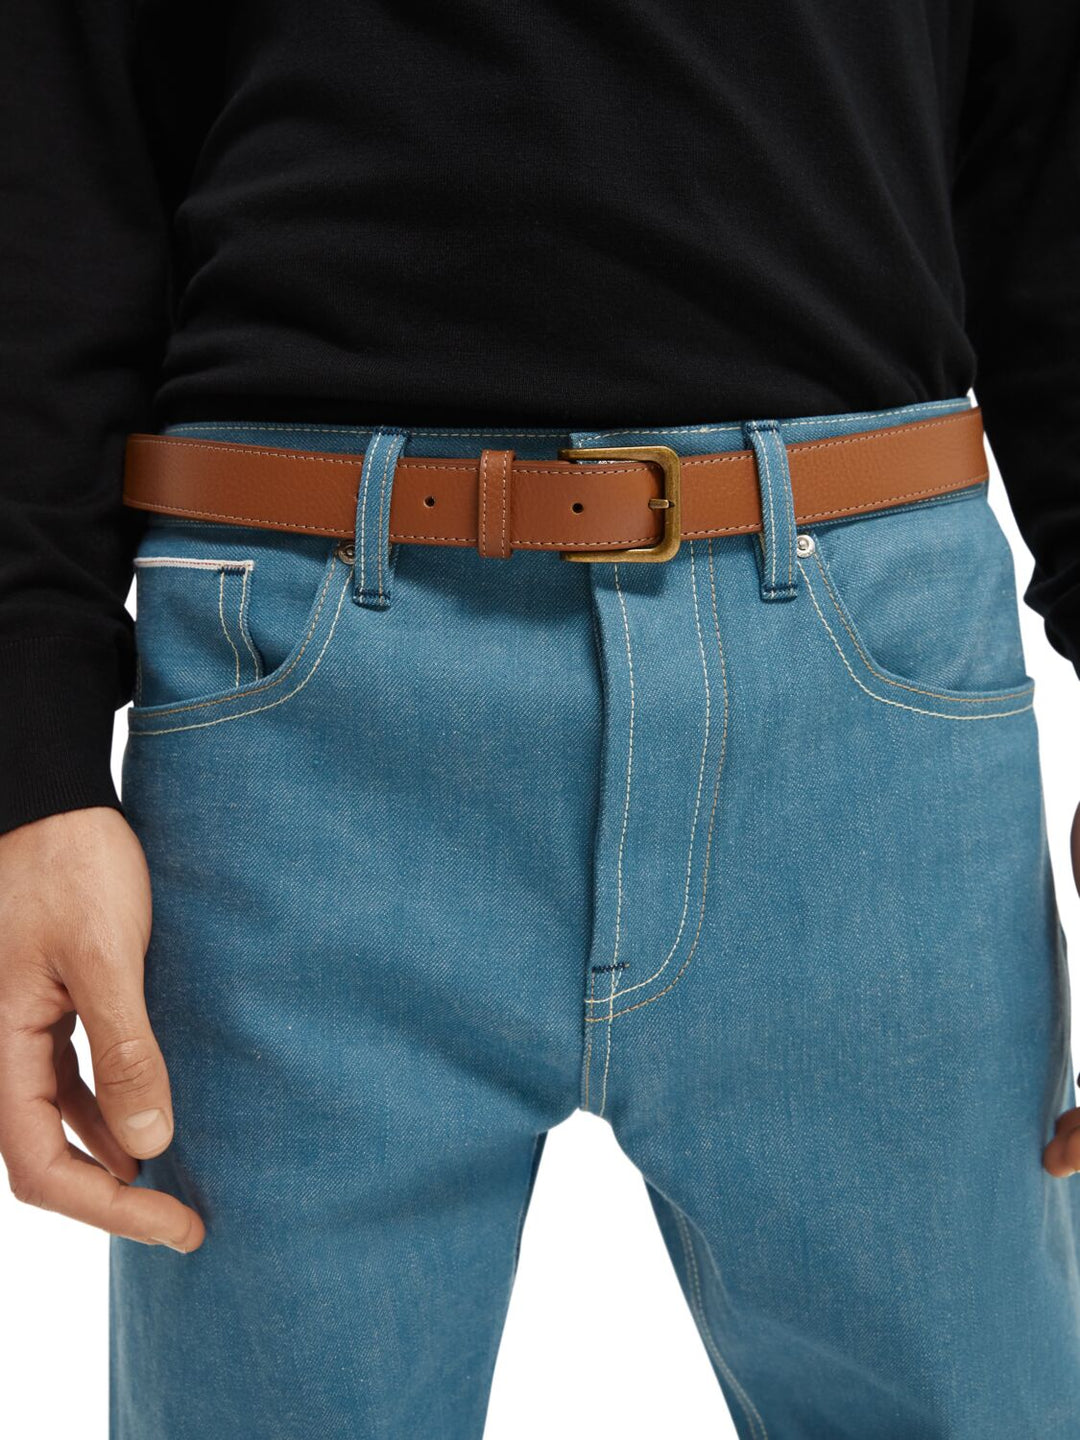 Classic Leather Belt in Teak | Buster McGee Daylesford